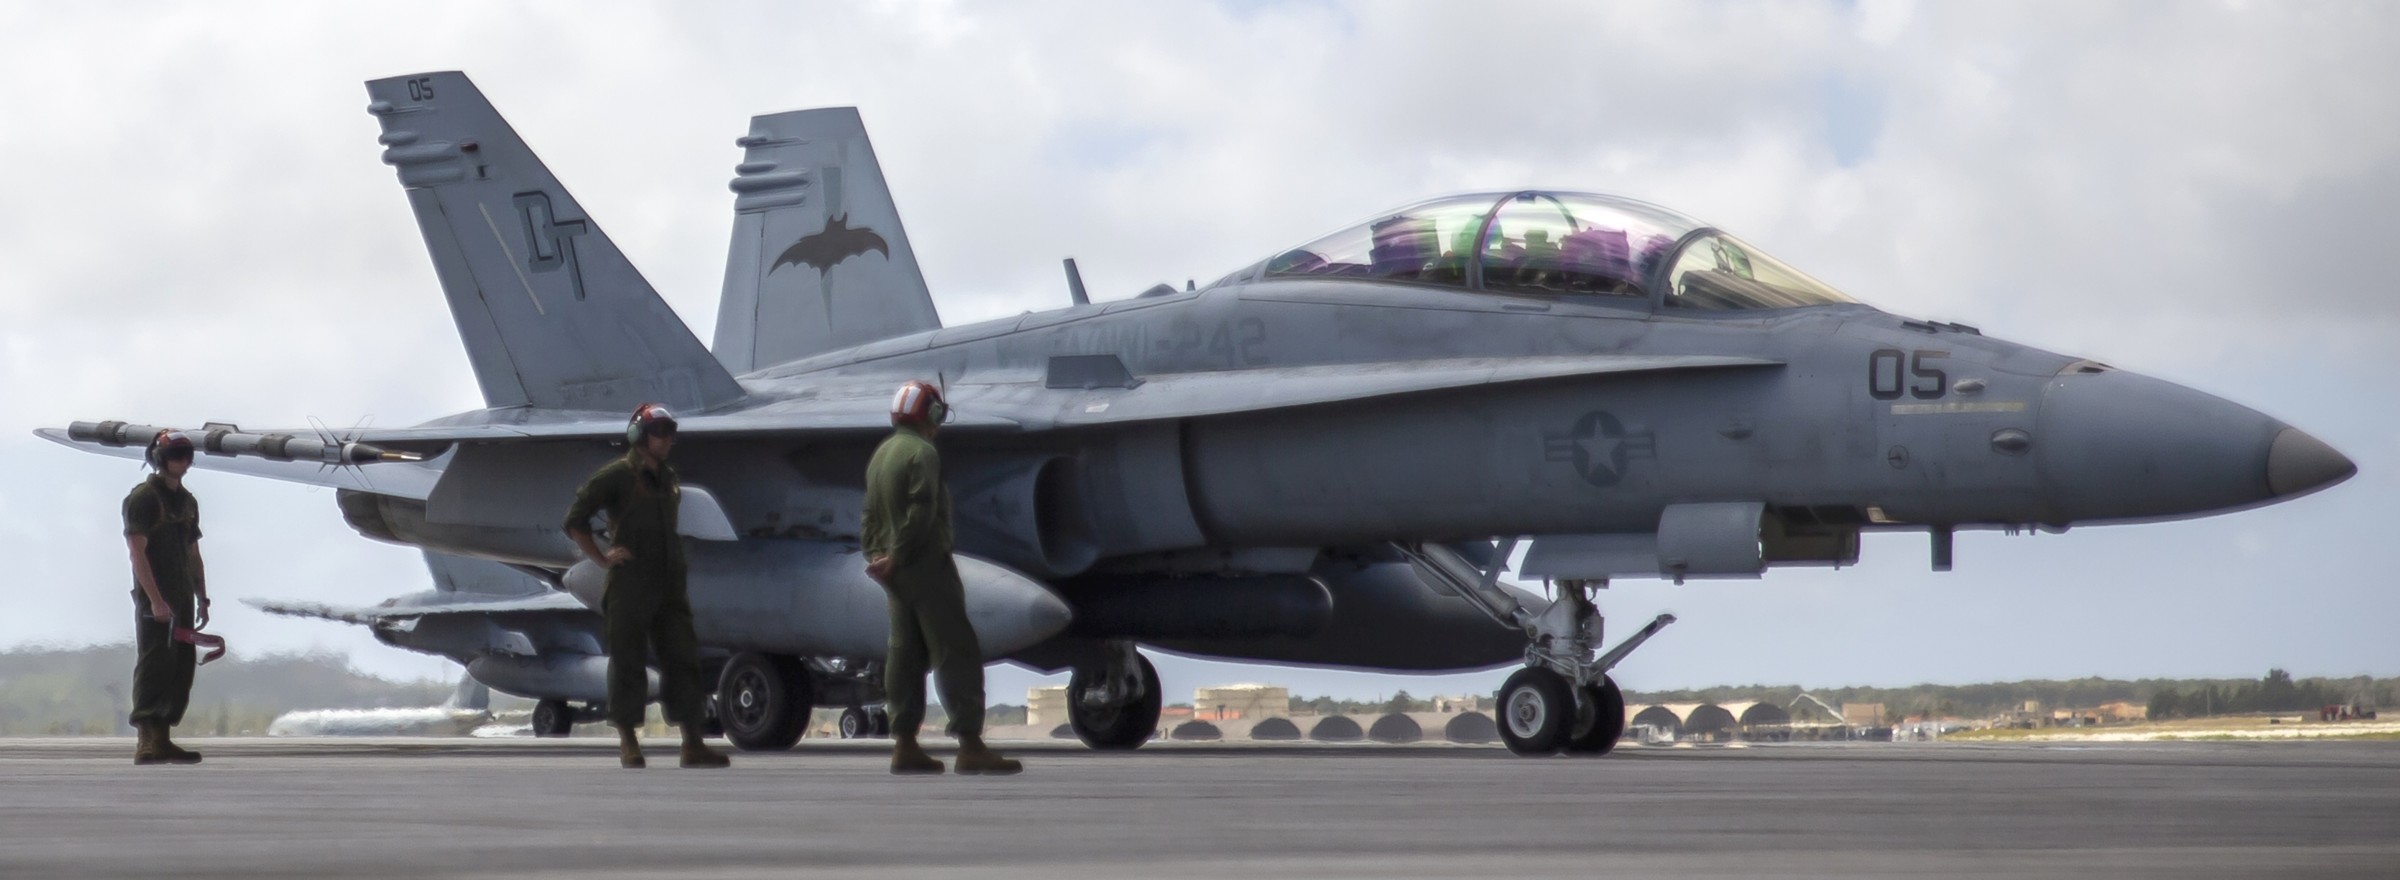 vmfa(aw)-242 bats marine all-weather fighter attack squadron usmc f/a-18d hornet 100